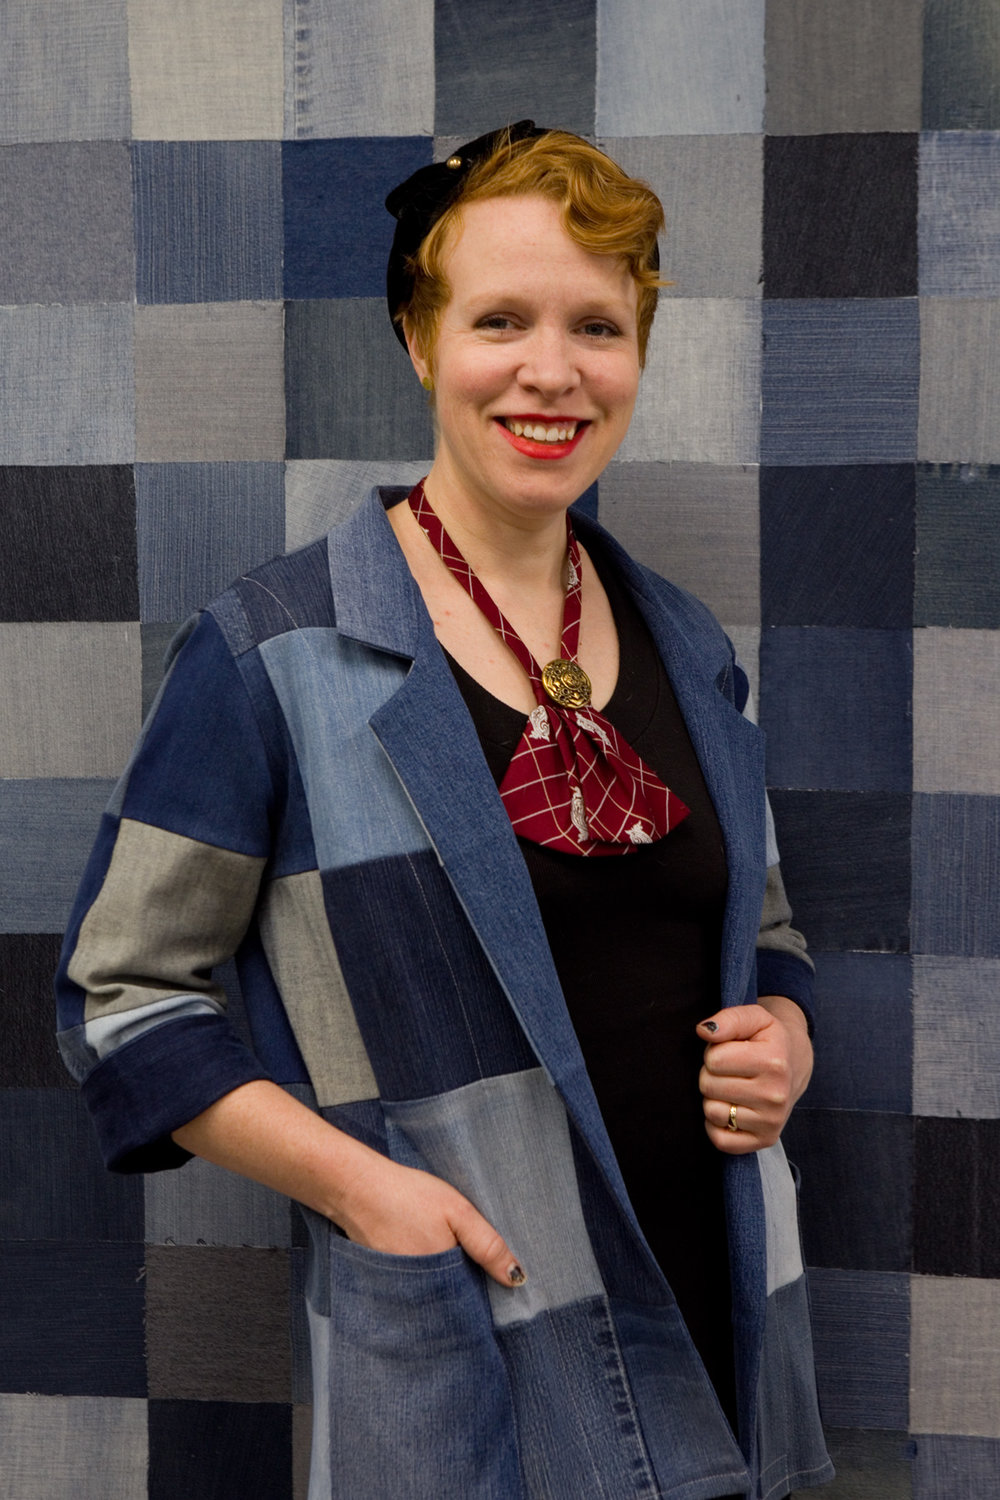 RETHINK owner Kristen McCoy in an upcycled denim blazer. She explained, “To upcycle is to add value to something in the processing. We’re able to take a worn garment and turn it into something new. We take jeans that are no longer wearable and cut them into denim squares. The result is a reversible blazer that still has a lot of wear. It’s on sale at the shop, and is size fluid (small to large).”  (Photos by Margie O’Loughlin)